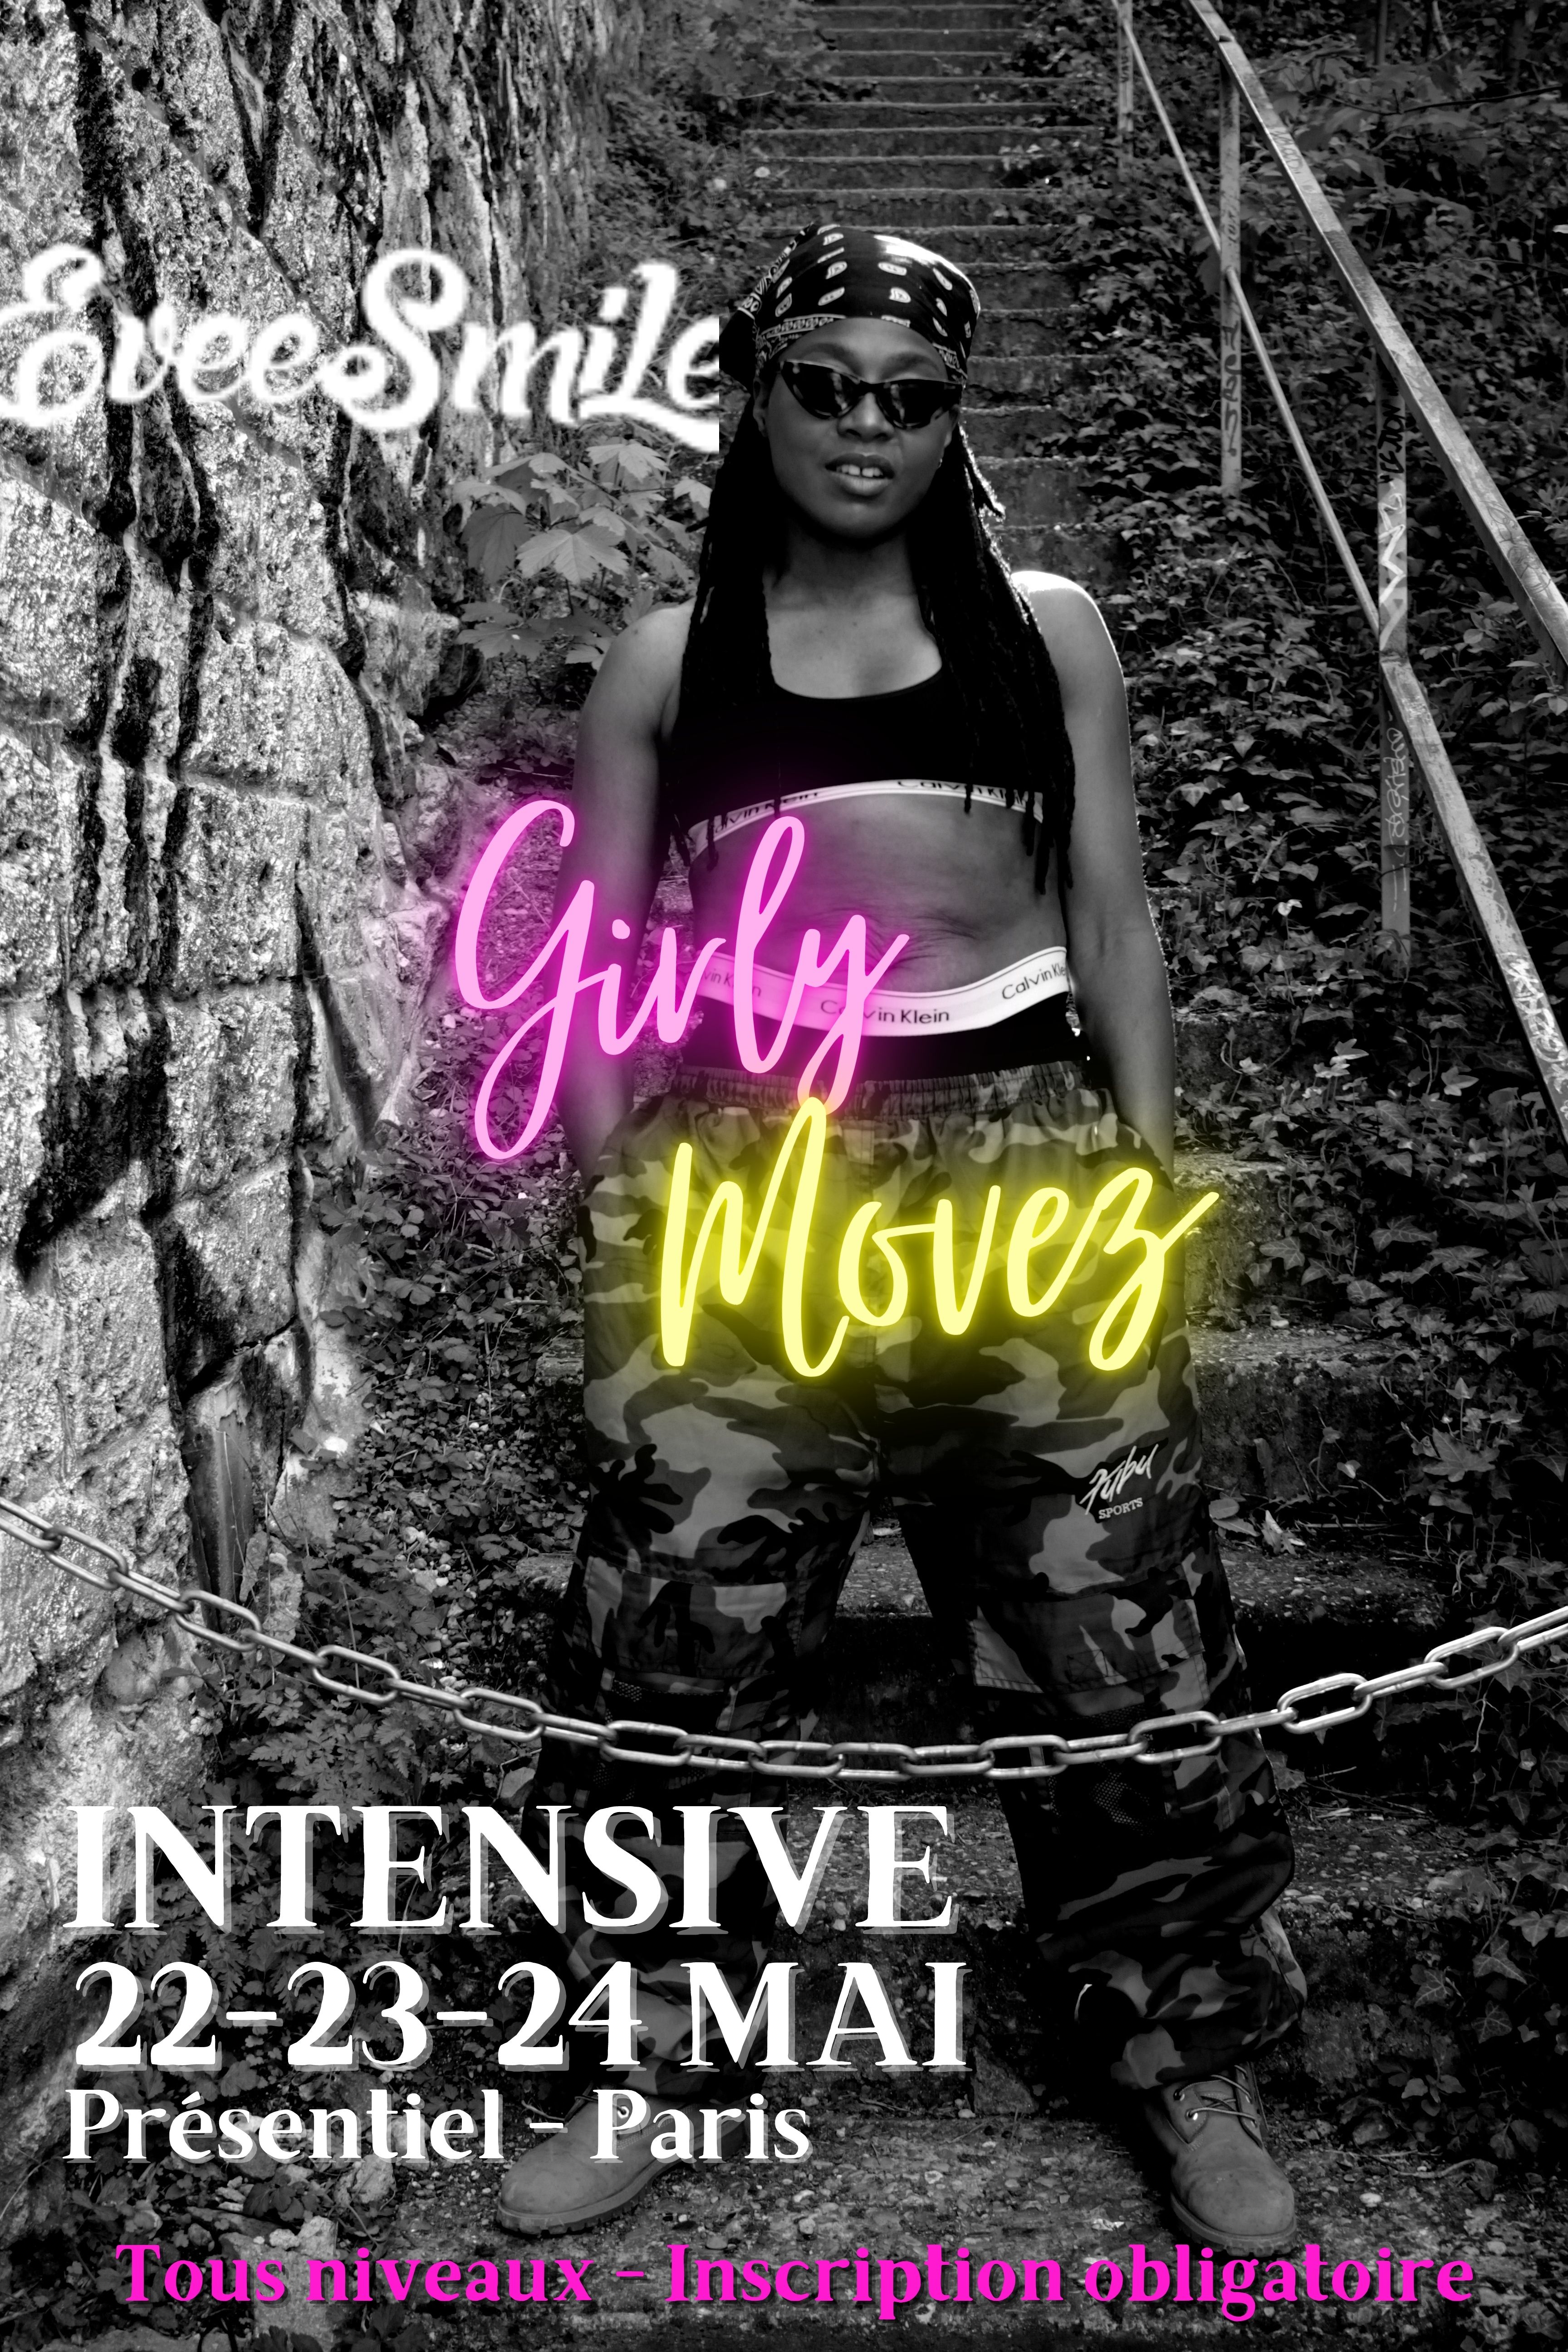 Intensive Girly Movez